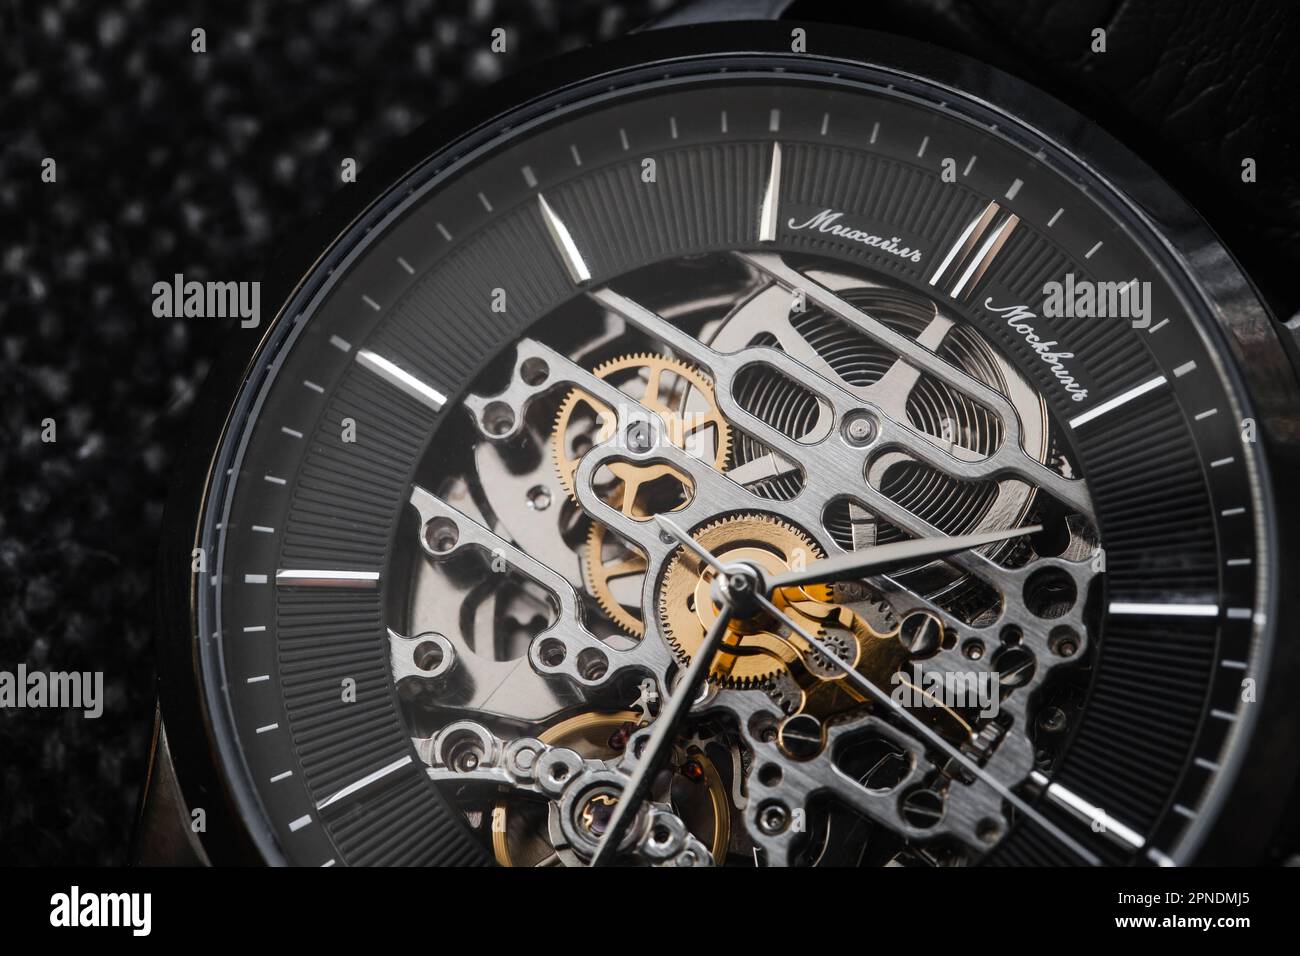 Uglich, Russia - February 1, 2021: Mikhail Moskvin skeleton watch by Uglich Watch Factory, macro photo of black clock face and automatic movement Stock Photo